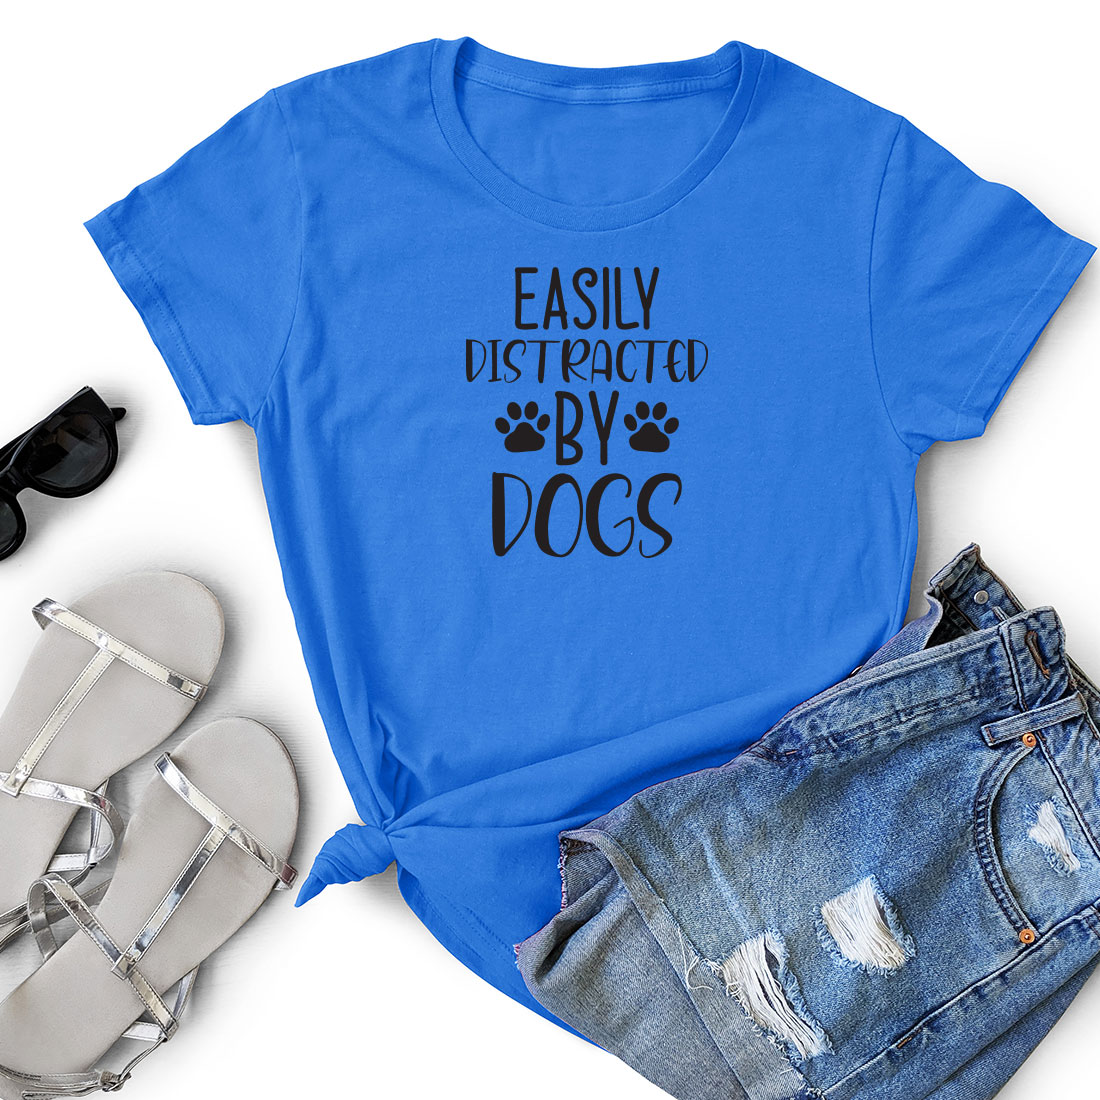 T - shirt that says easily distracted by dogs.